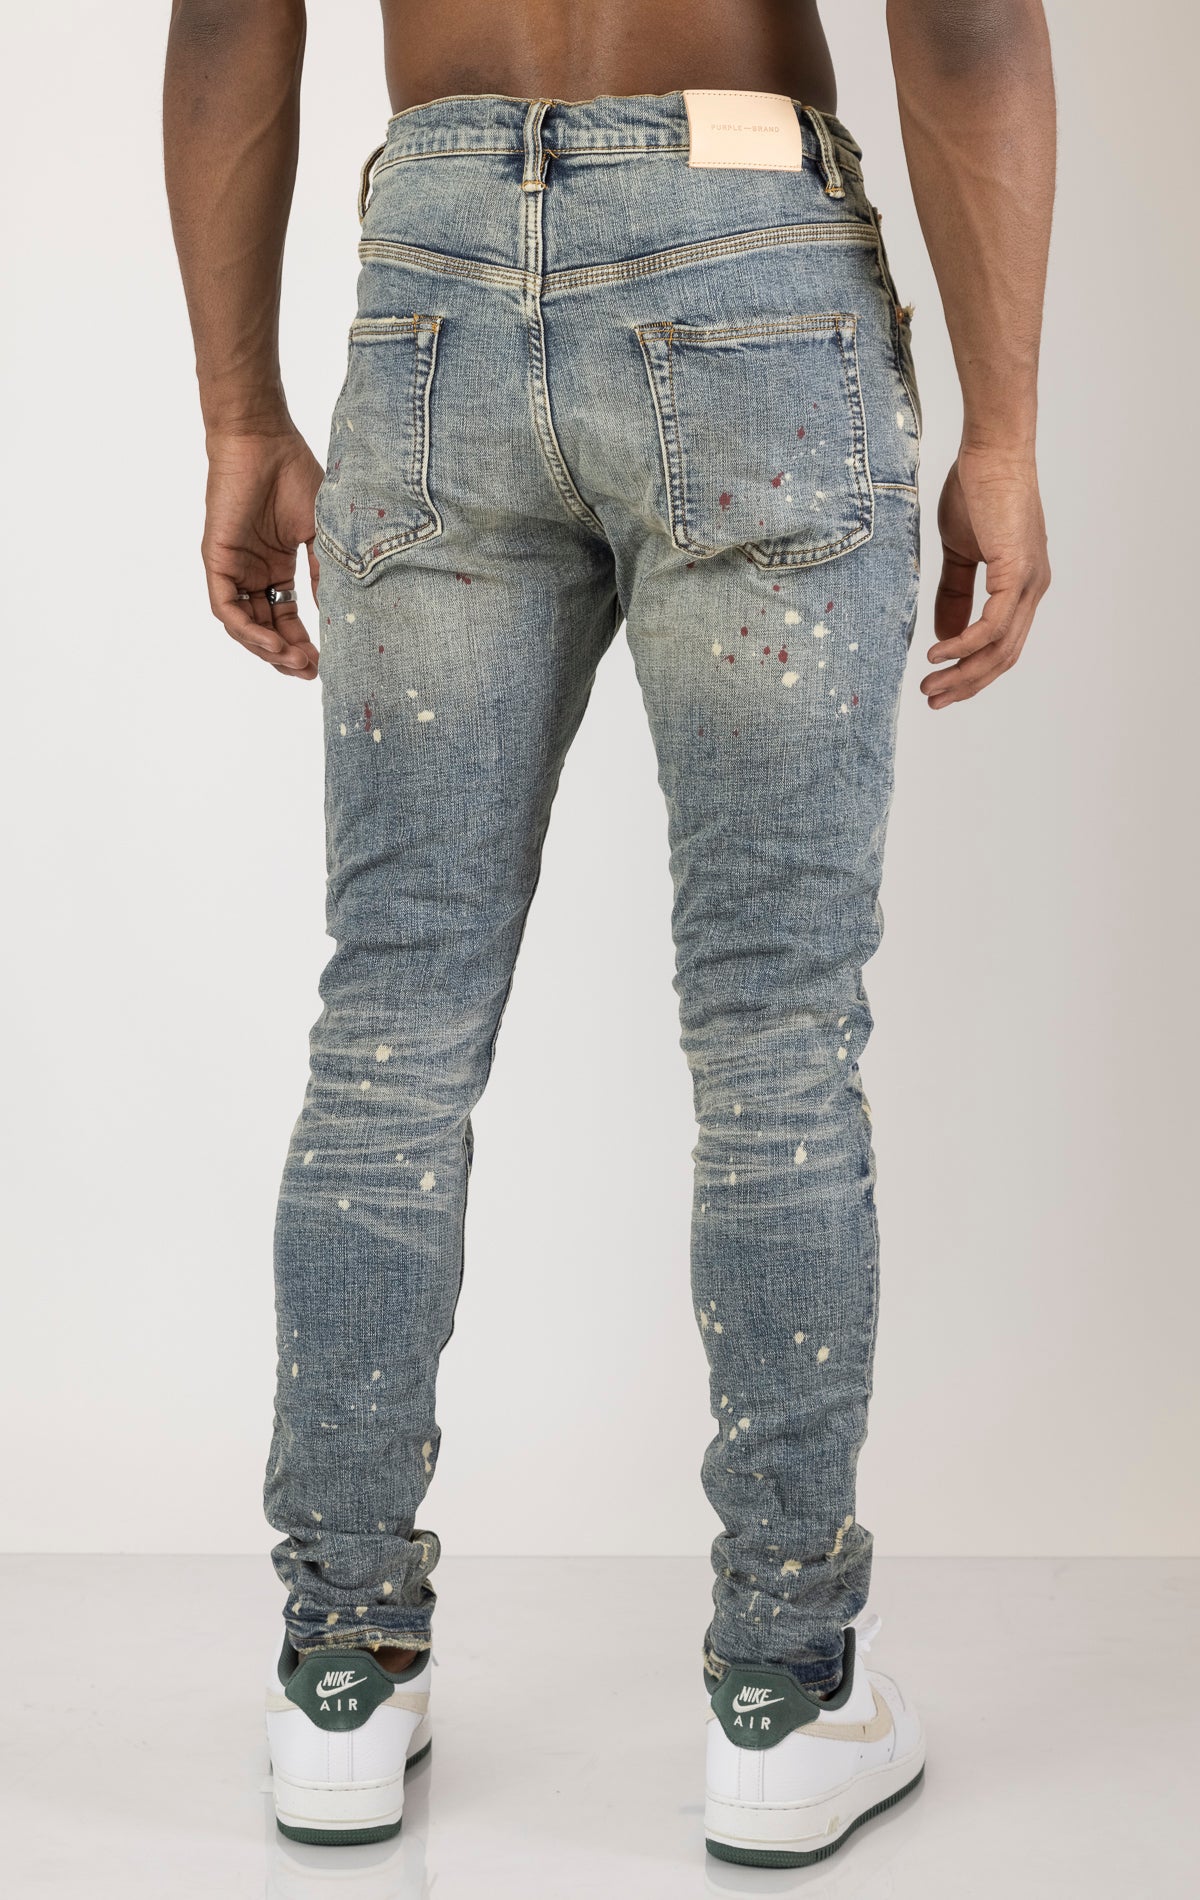 Vintage Spotted Indigo Jeans in dark wash with subtle lighter colored spots. Made from 98% cotton and 2% elastane for comfort. Features include lined back pockets and yoke for comfort and shape retention, reinforced belt loops, and hidden back pocket rivets.